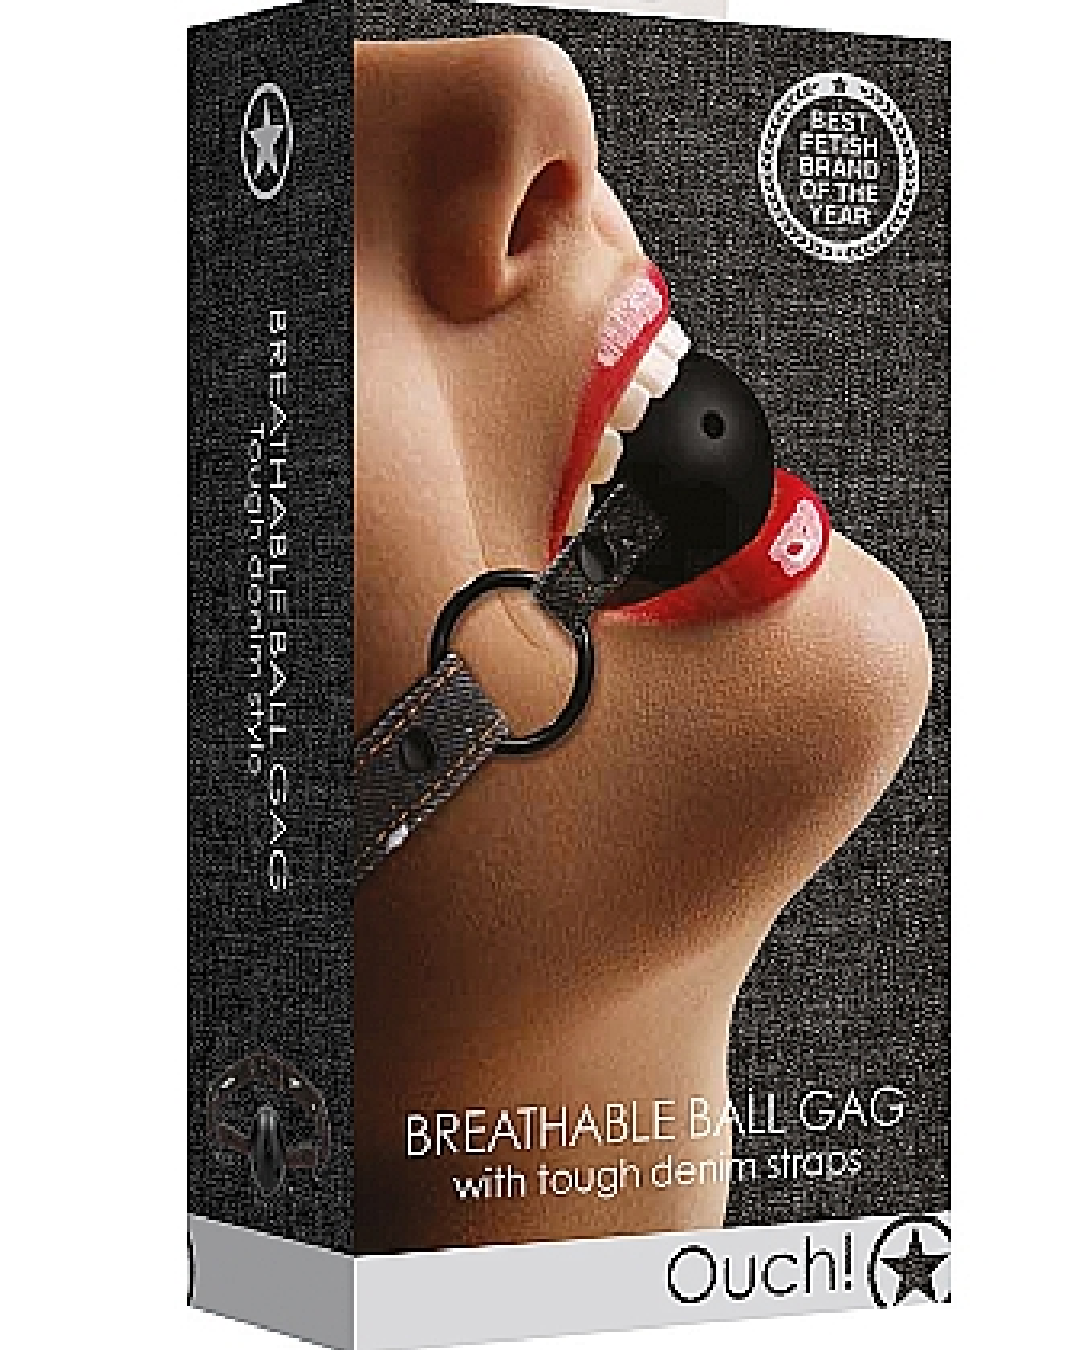 Ouch!  Roughend Denim Style Breathable Ball Gag  - Black product box 